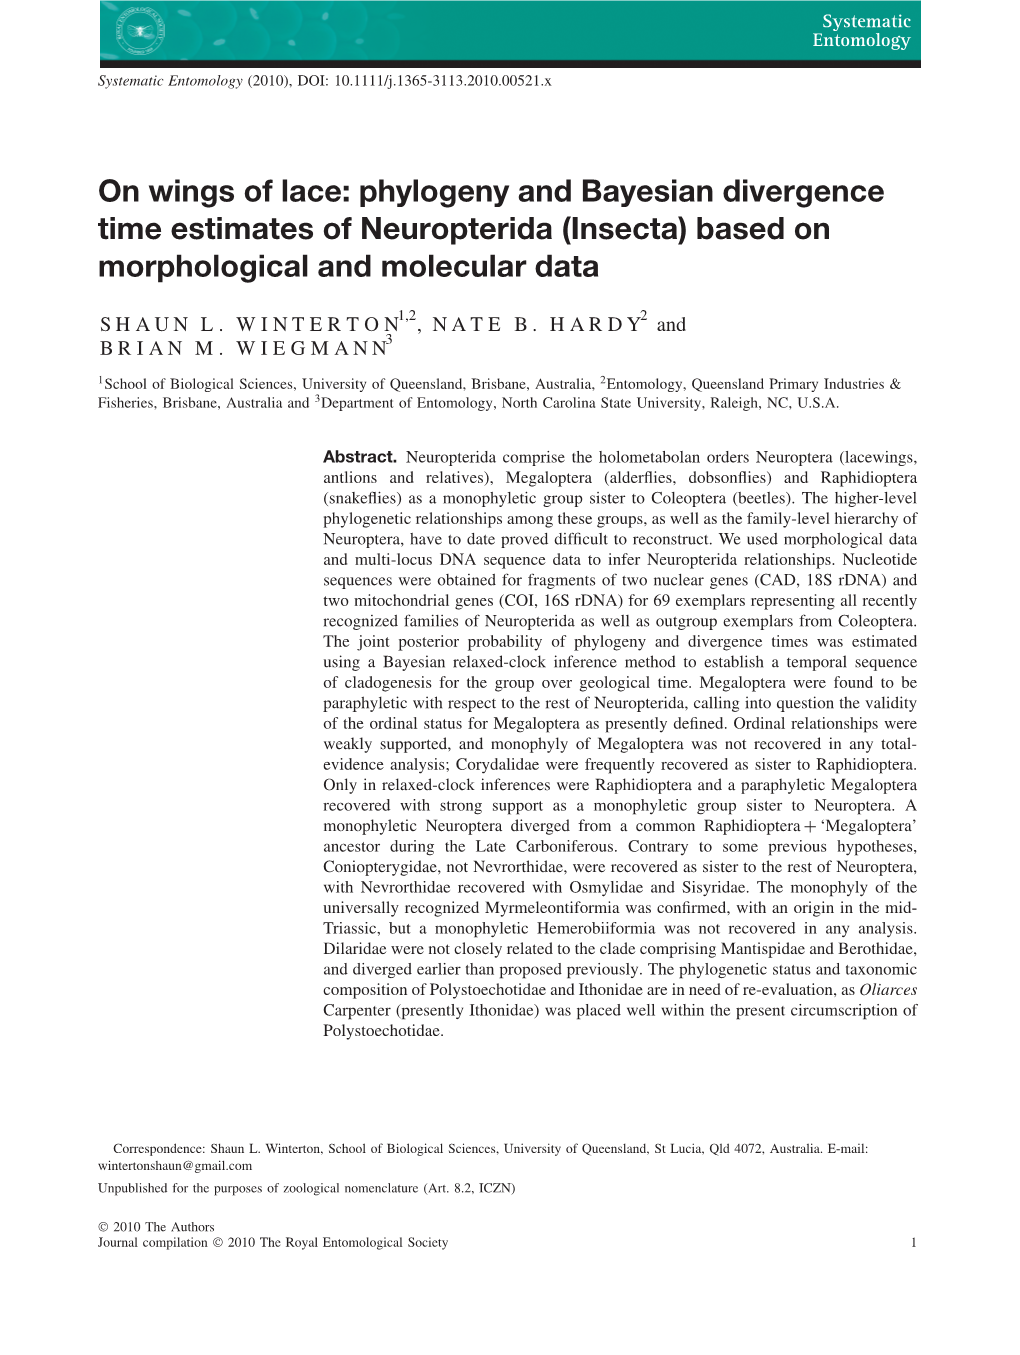 Phylogeny and Bayesian Divergence Time Estimates of Neuropterida (Insecta) Based on Morphological and Molecular Data